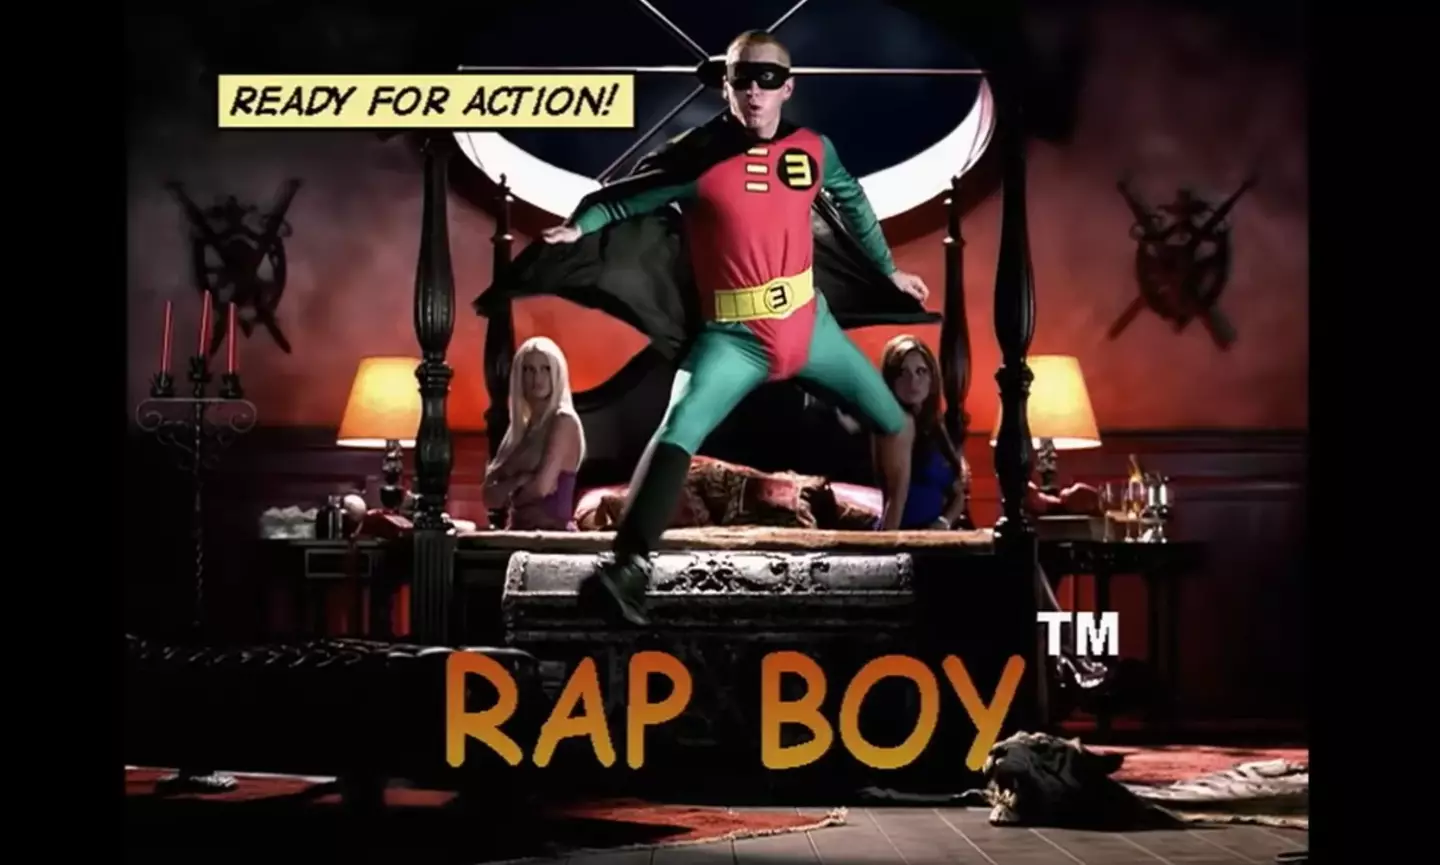 The rapper uses the same freeze frame for the unveiling of ‘Rap Boy’. (Eminem/YouTube) 